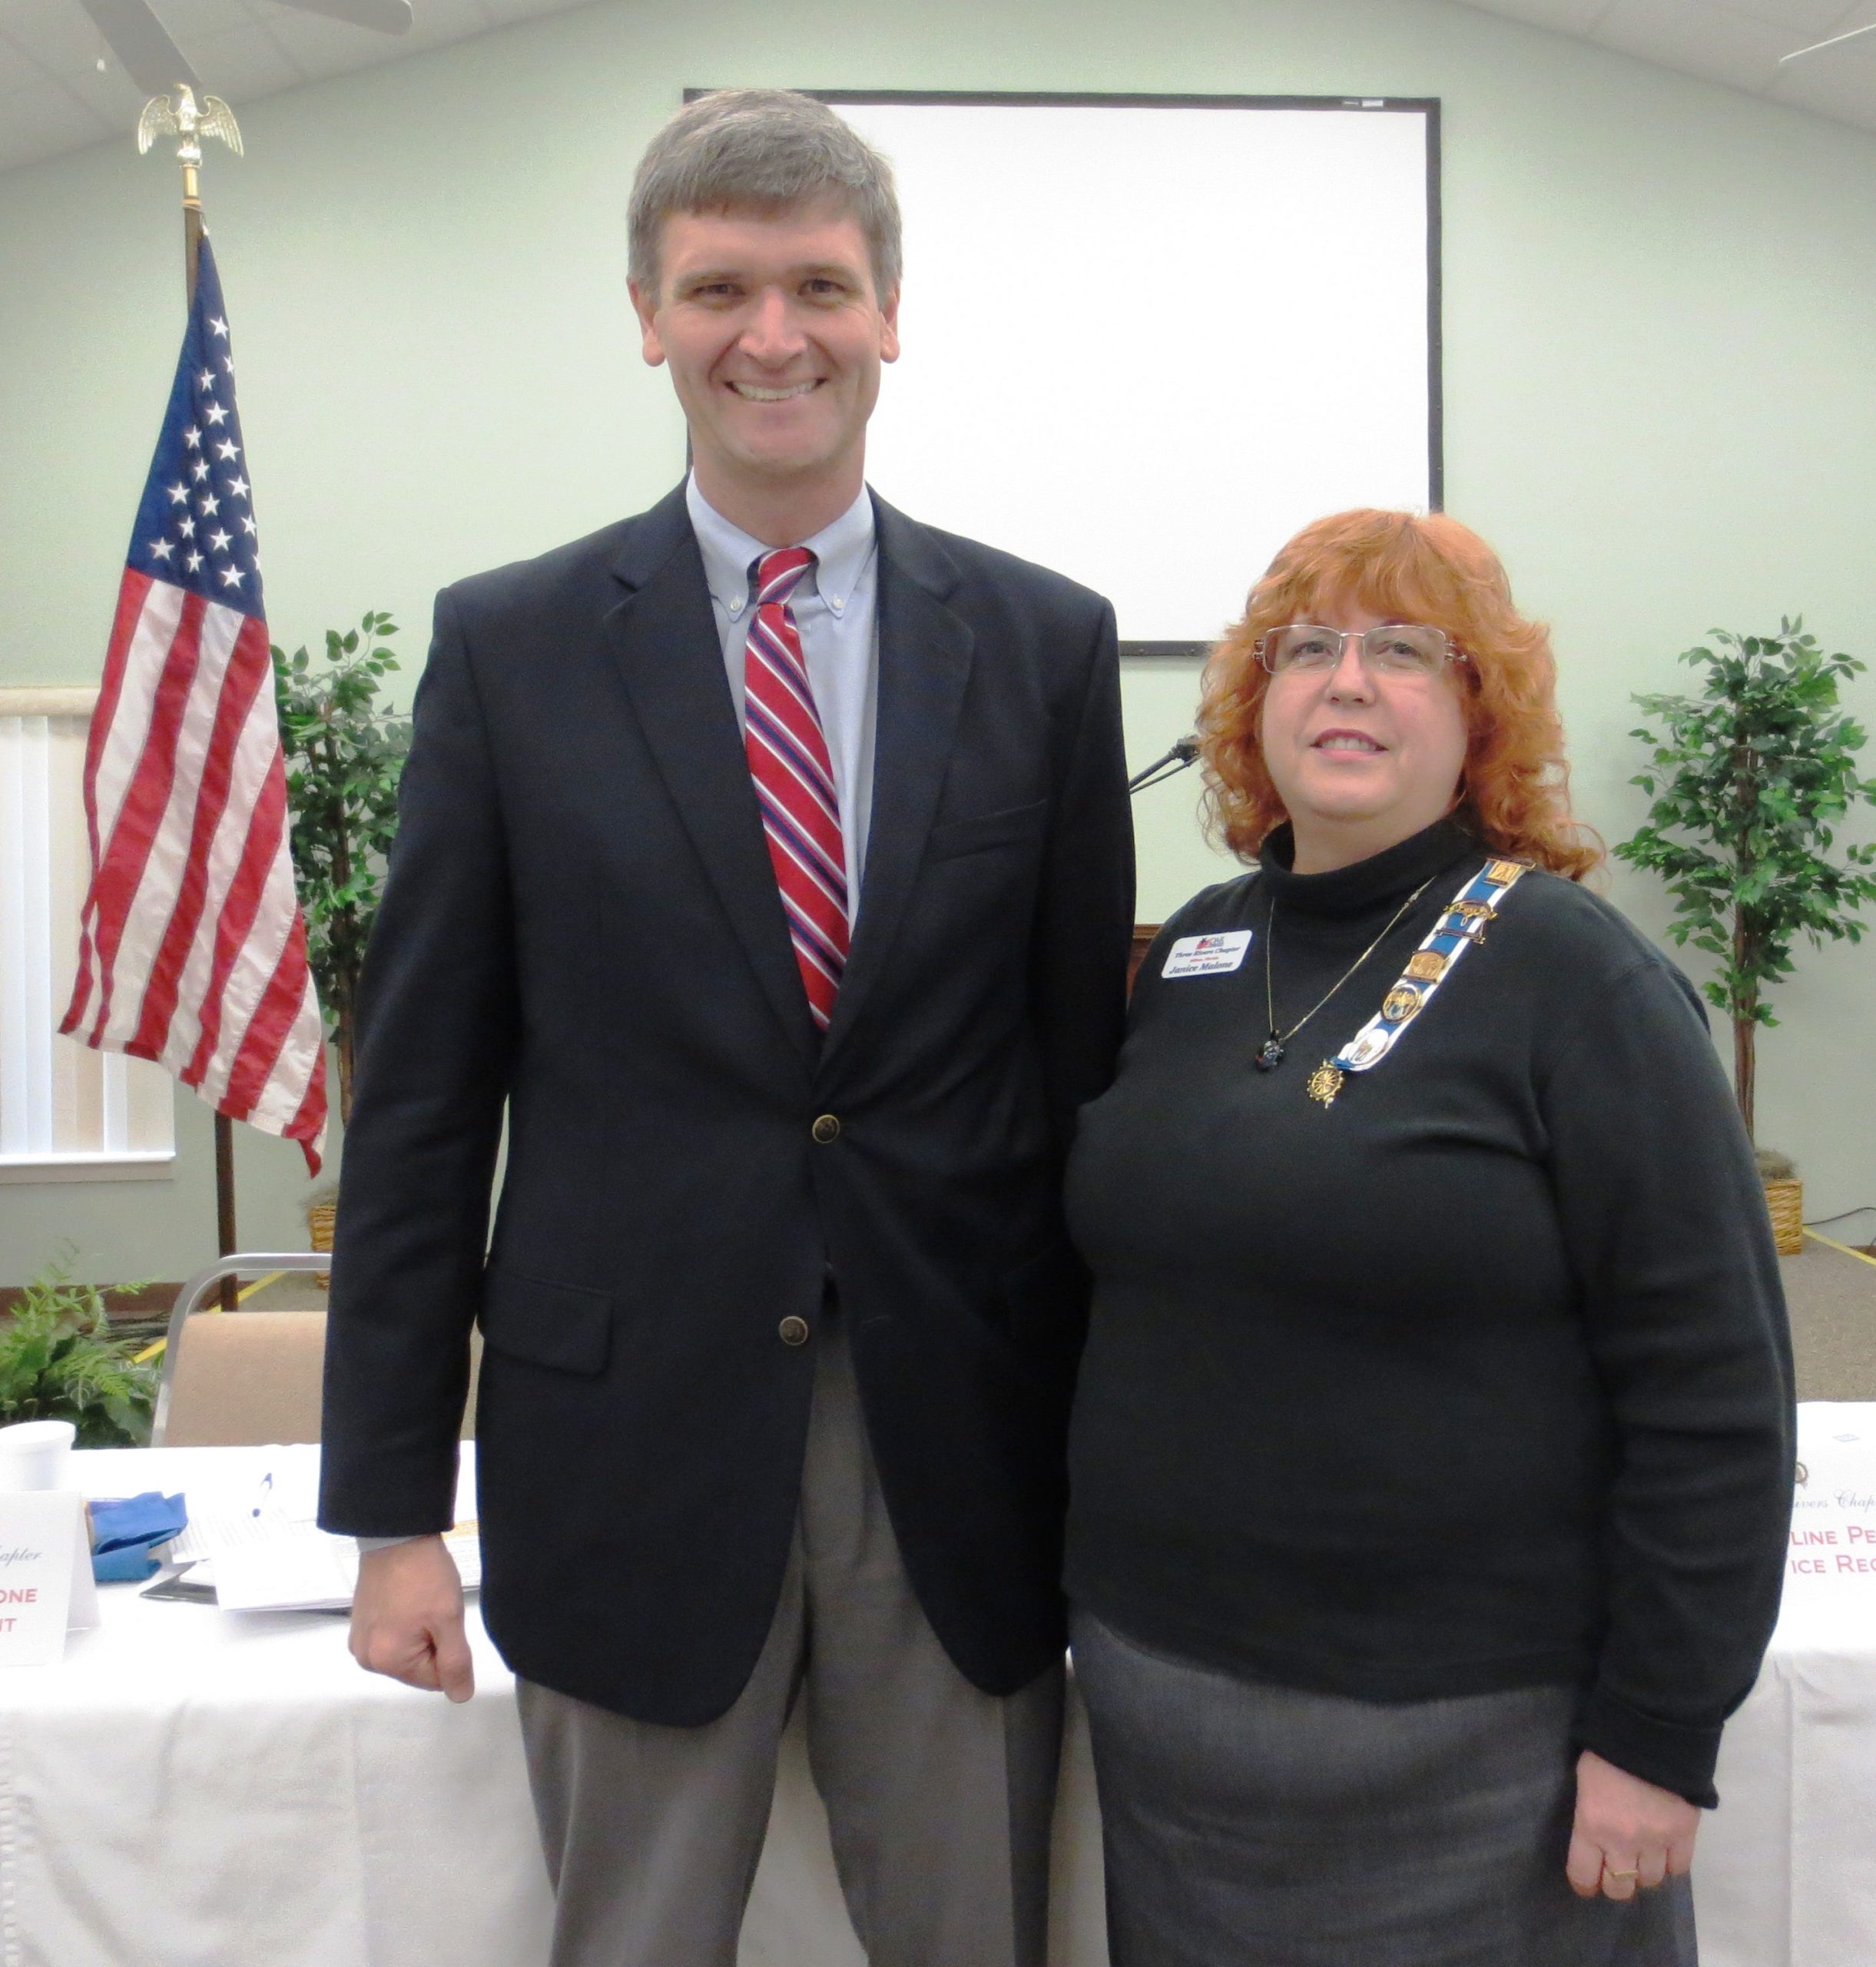 Guest speaker Hill Goodspeed and Vice Regent Janice Malone at Saturday’s Three Rivers Chapter, National Society Daughters of the American Revolution meeting at Bagdad United Methodist Church.